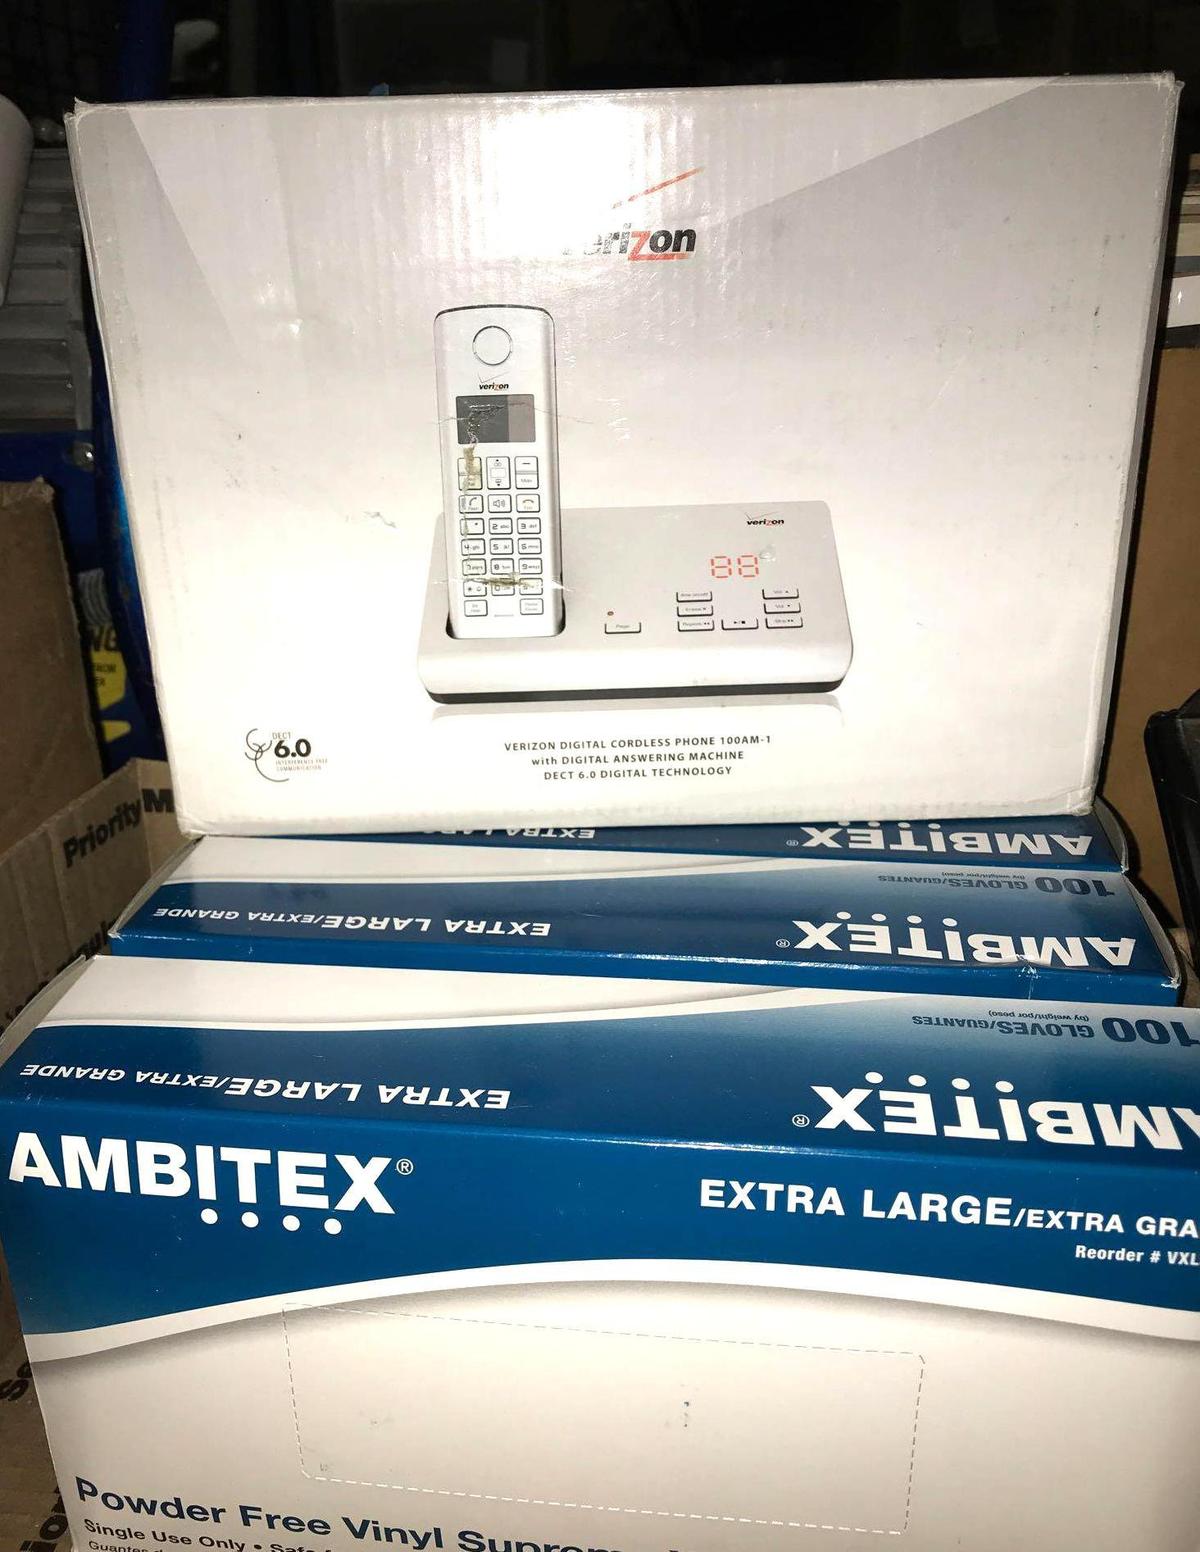 Verizon Cordless Phone and 3 Boxes of XL Gloves (300 Total)